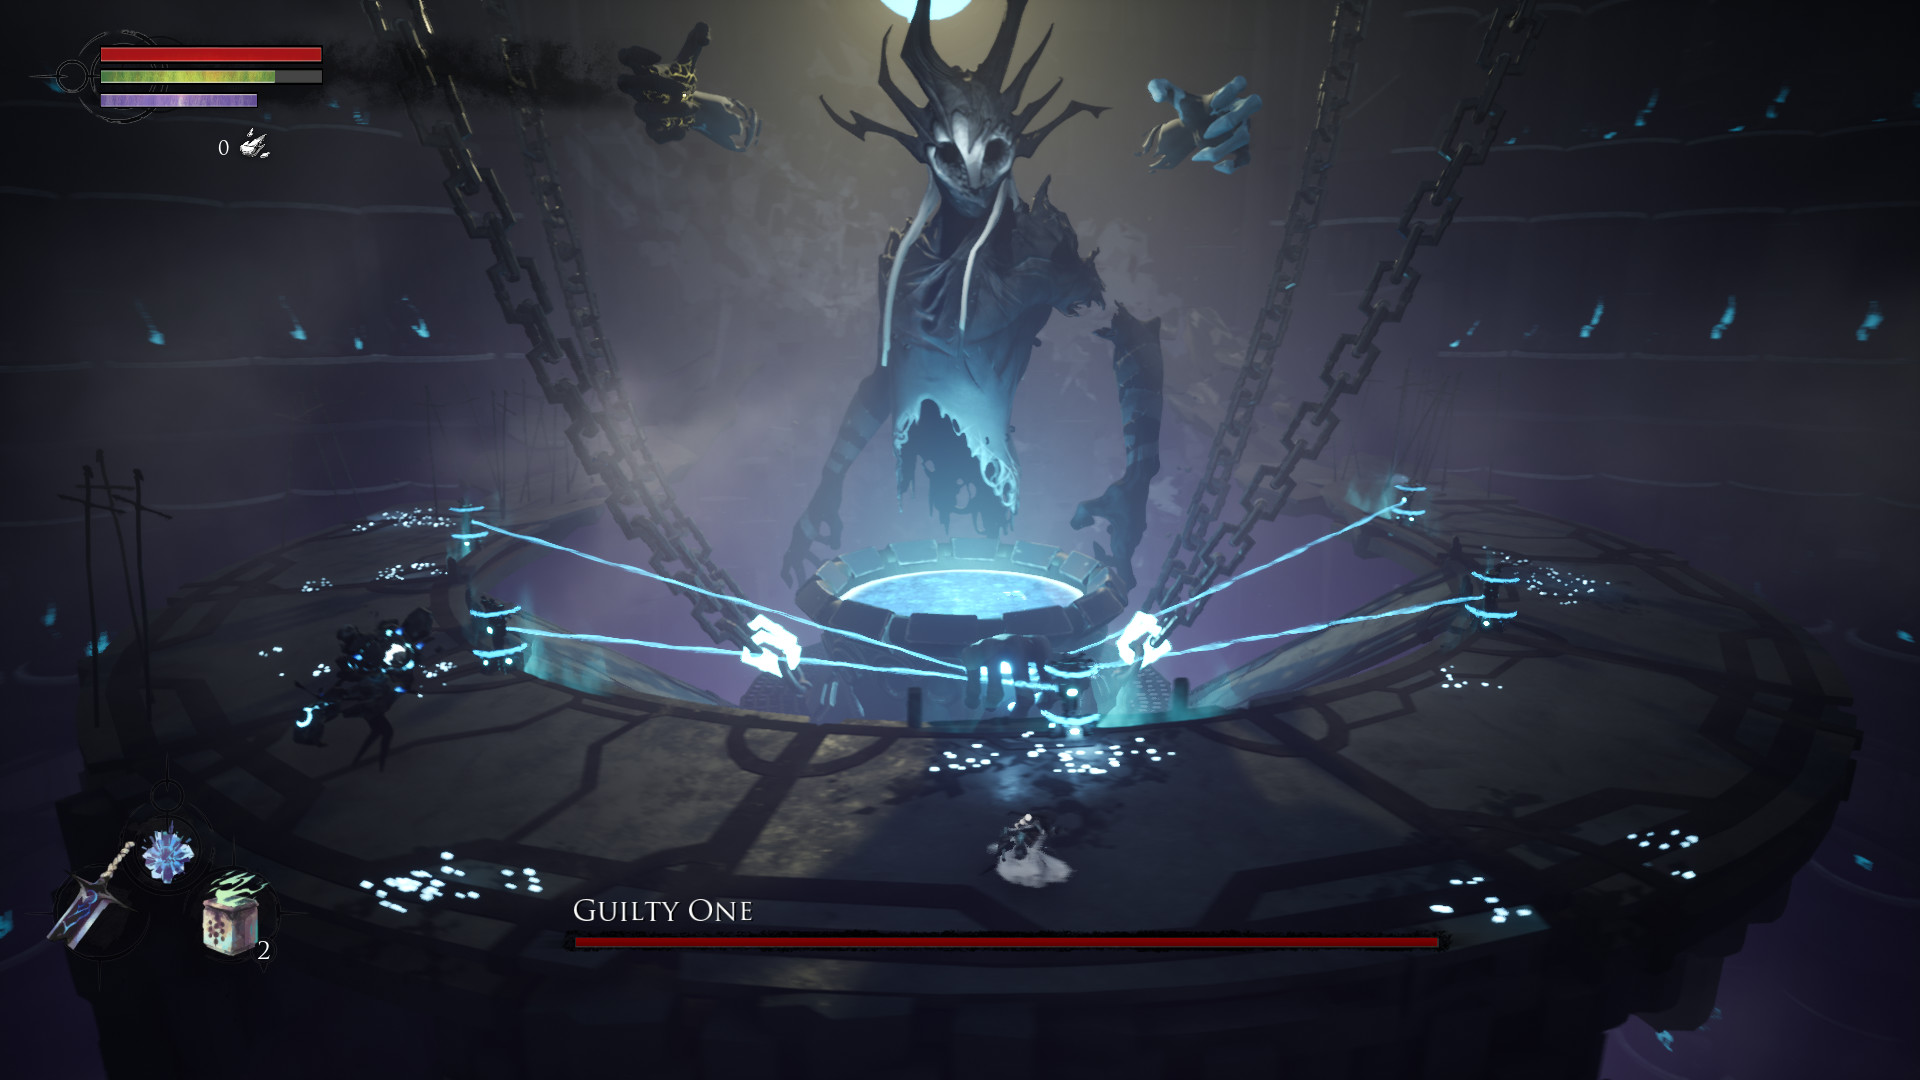 Shattered - Tale of the Forgotten King screenshot 1